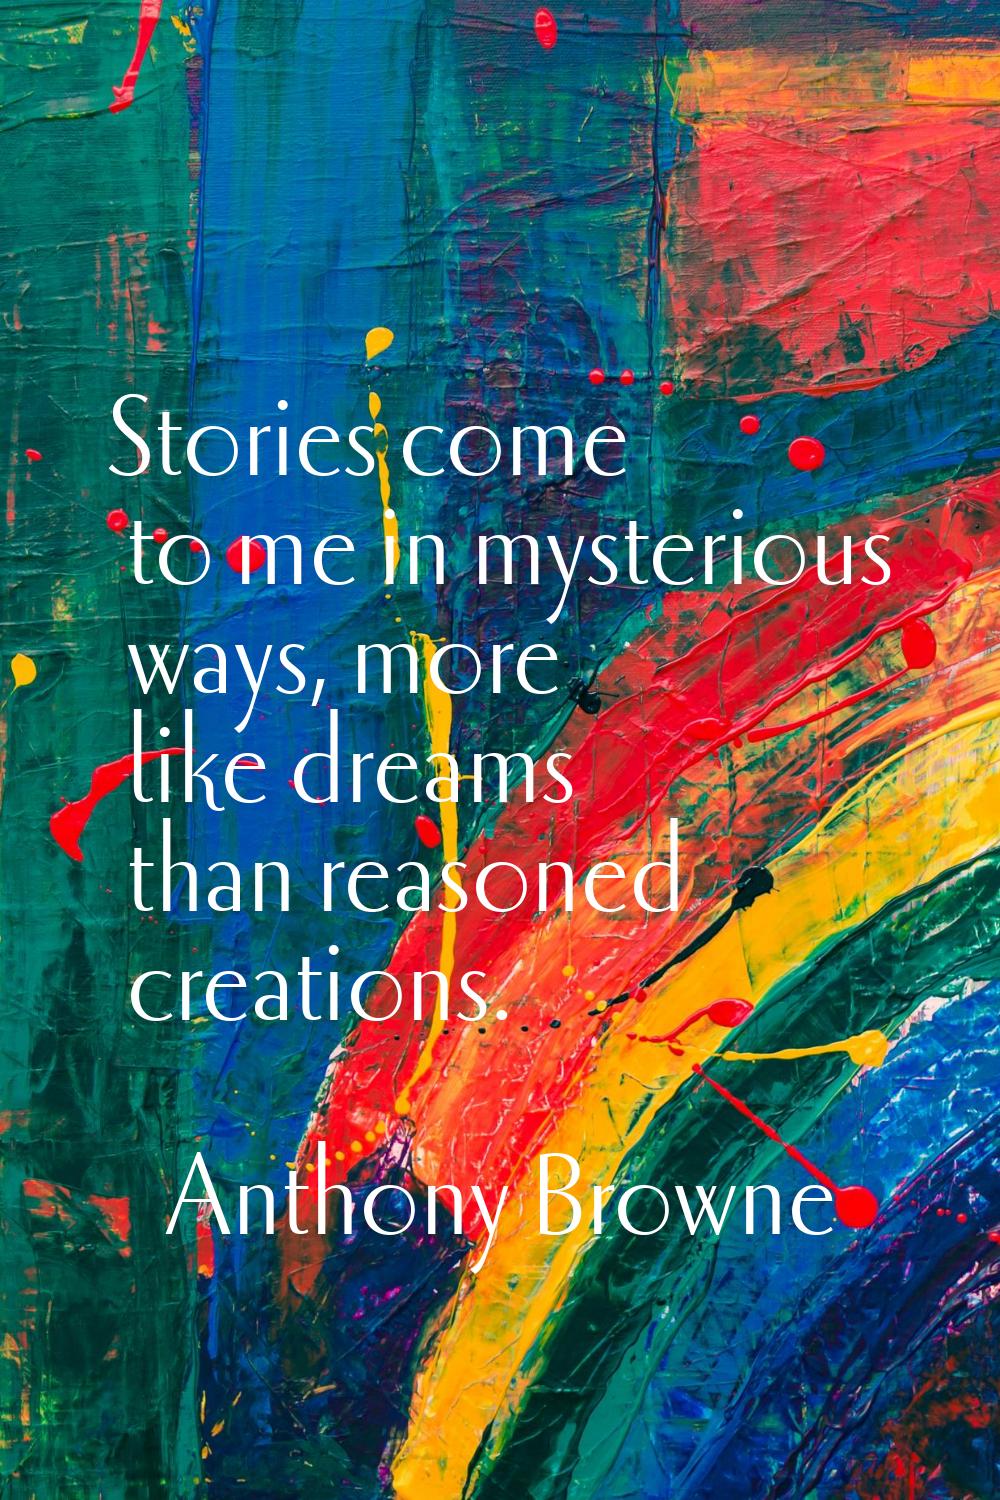 Stories come to me in mysterious ways, more like dreams than reasoned creations.